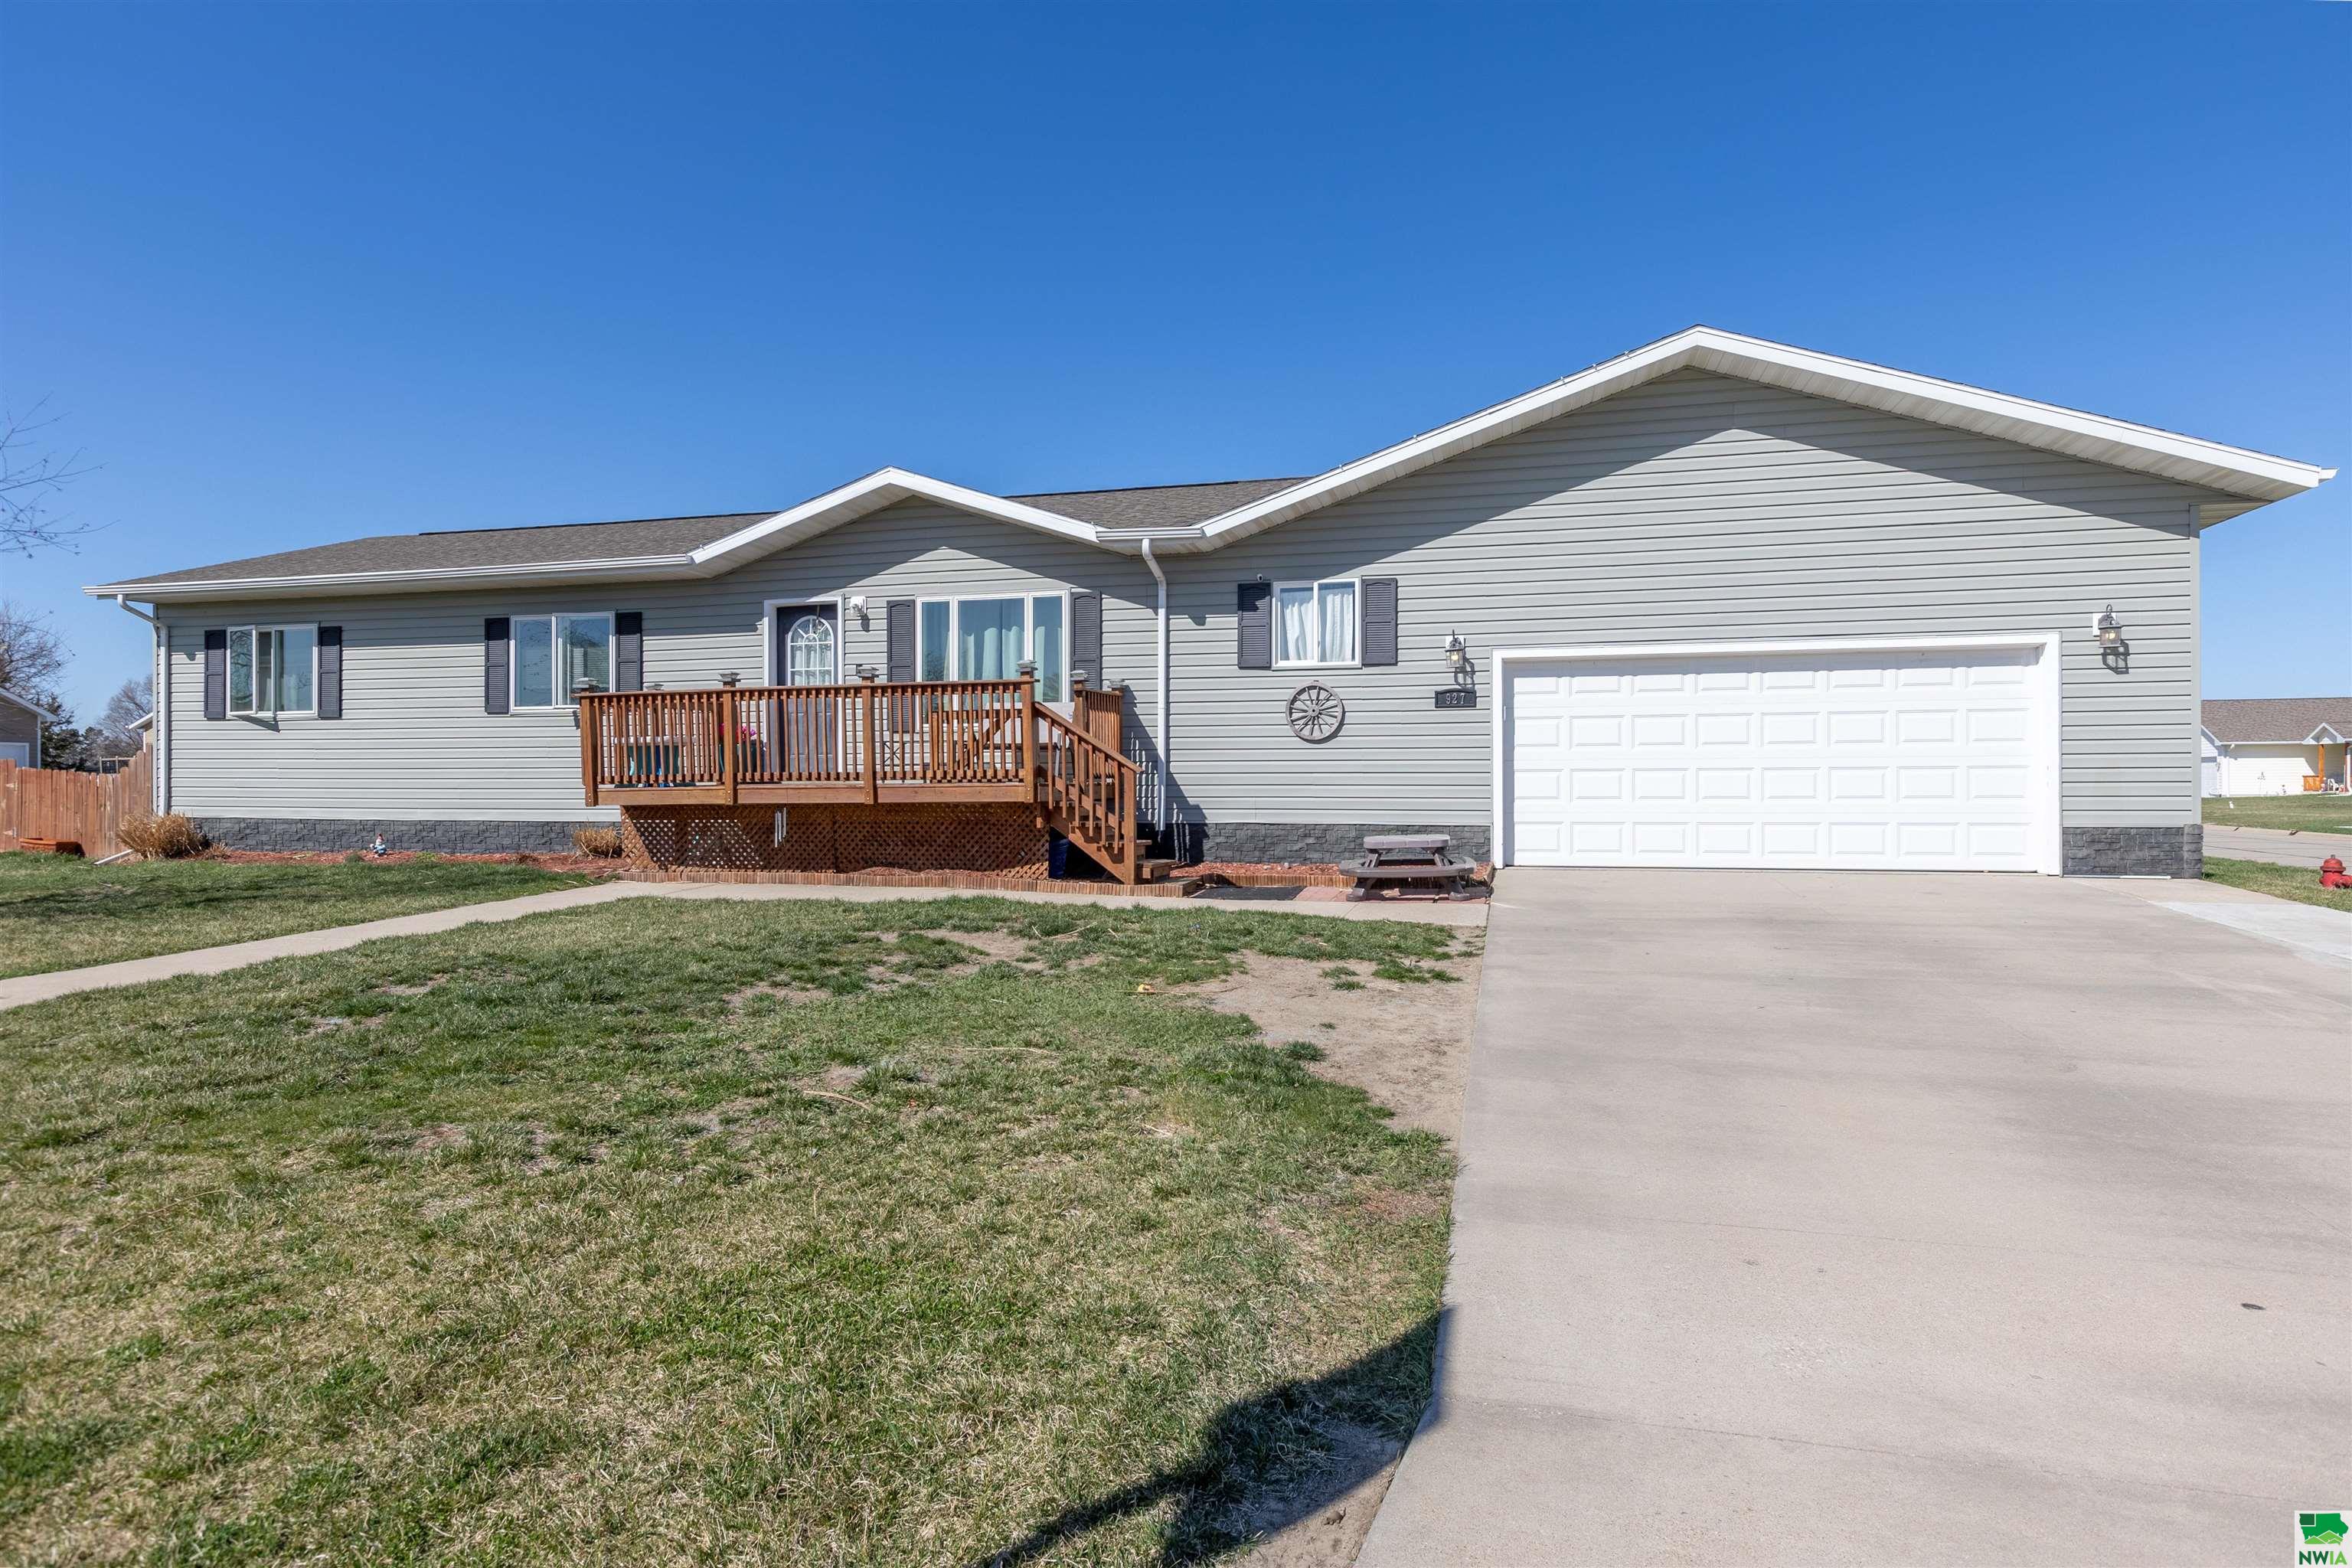 927 Harvest Bend, No. Sioux City, SD 57049 